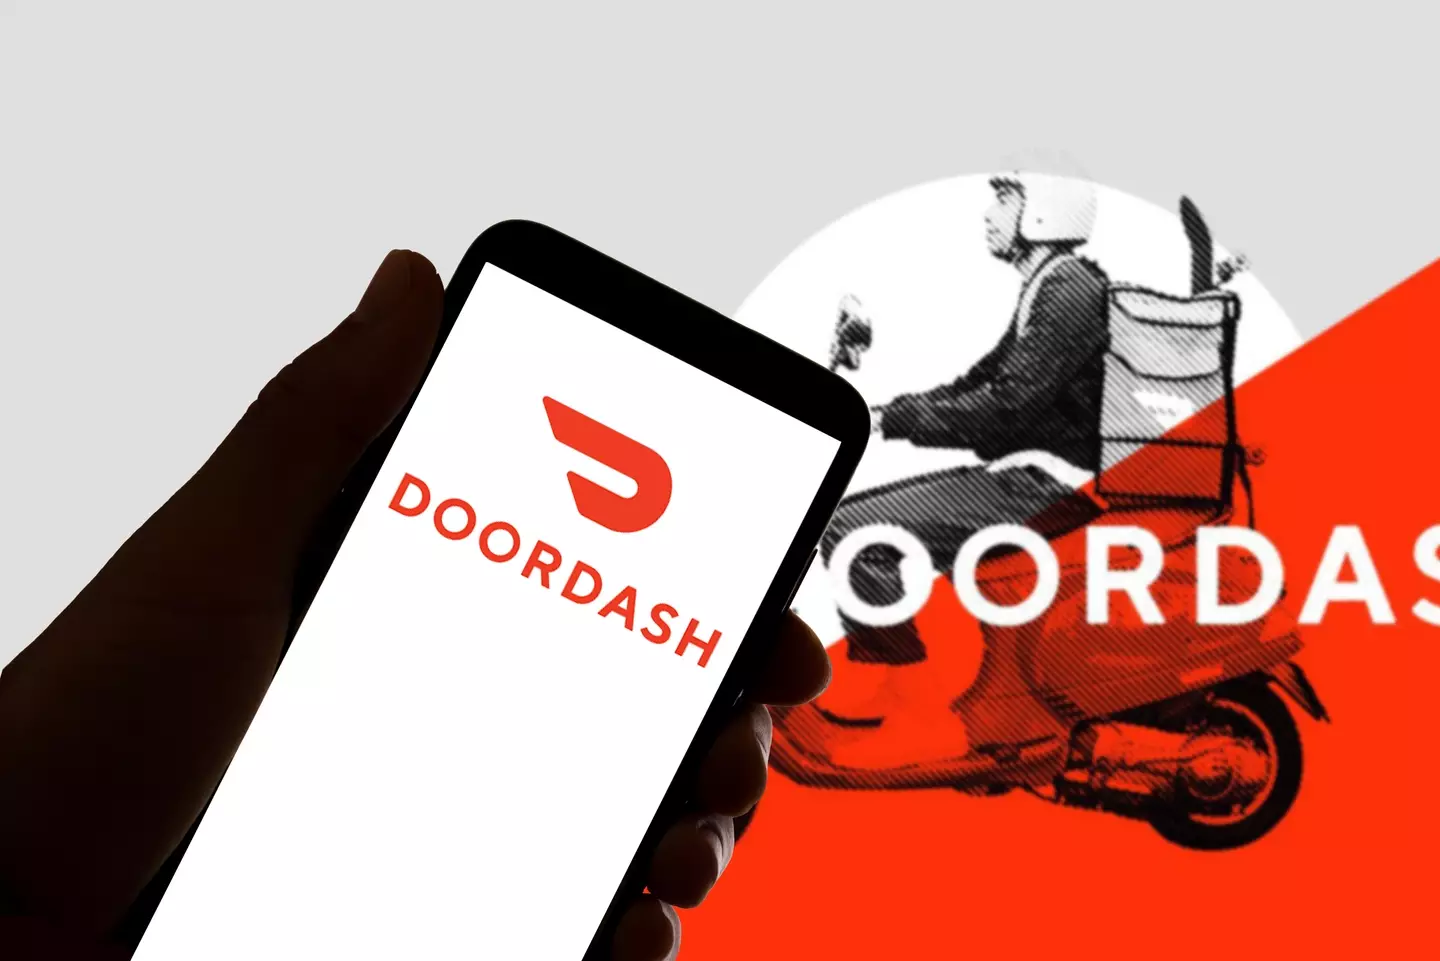 There have been many DoorDash stories in recent months.